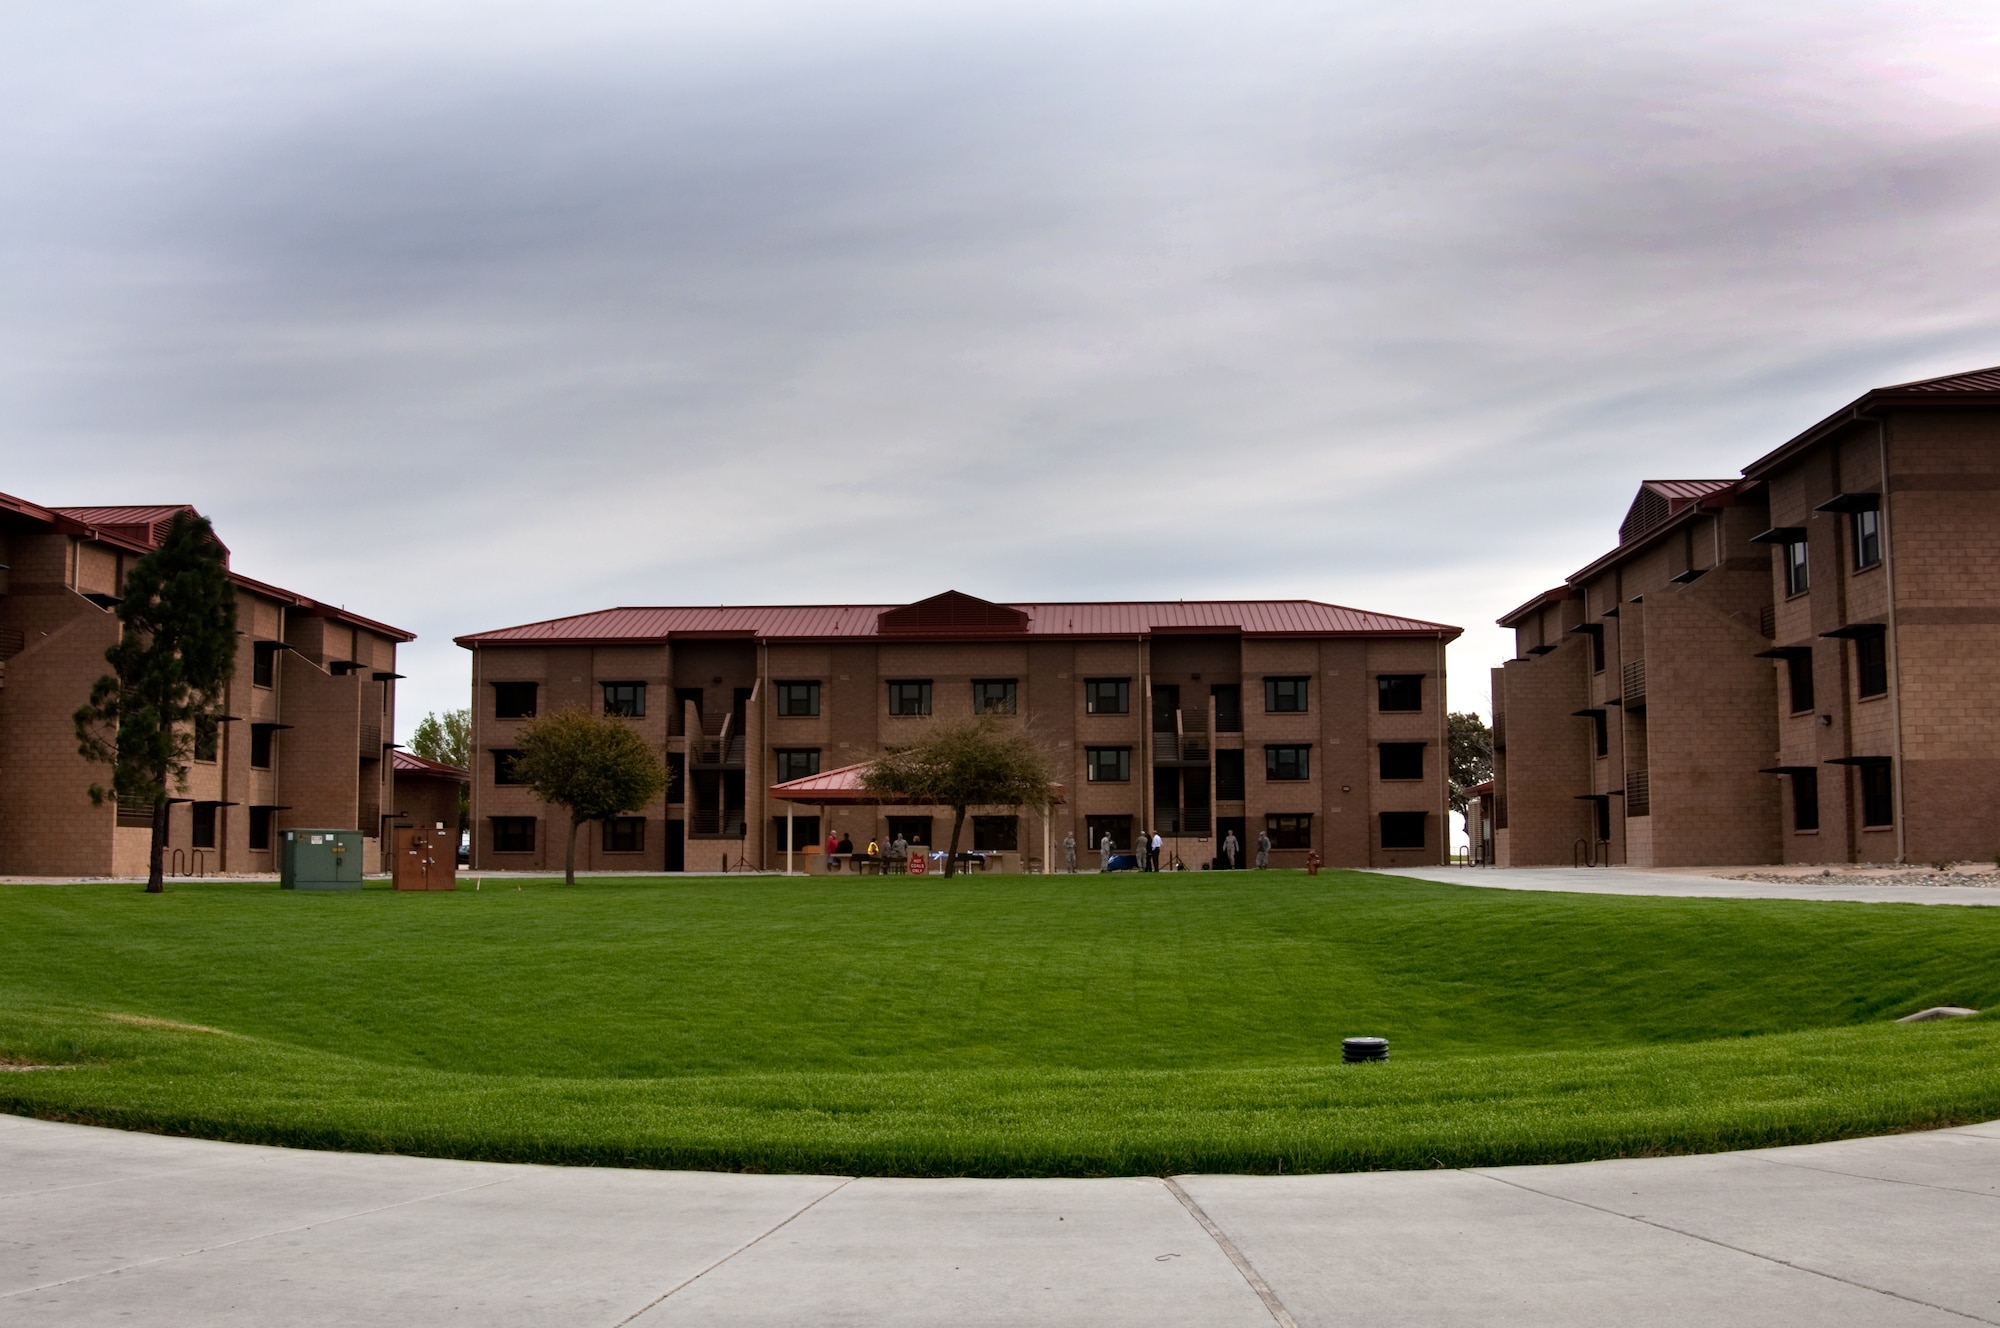 The $20 million, 51,000 square-foot complex, marks Travis’ first “Dorms-4-Airmen” unaccompanied housing initiative. “Dorms-4-Airmen” concept is designed to provide a four-person module with four private bedrooms, private baths, individual closets, a shared kitchen and laundry area and a common living room. (U.S. Air Force photo by Senior Airman Charles V. Rivezzo)